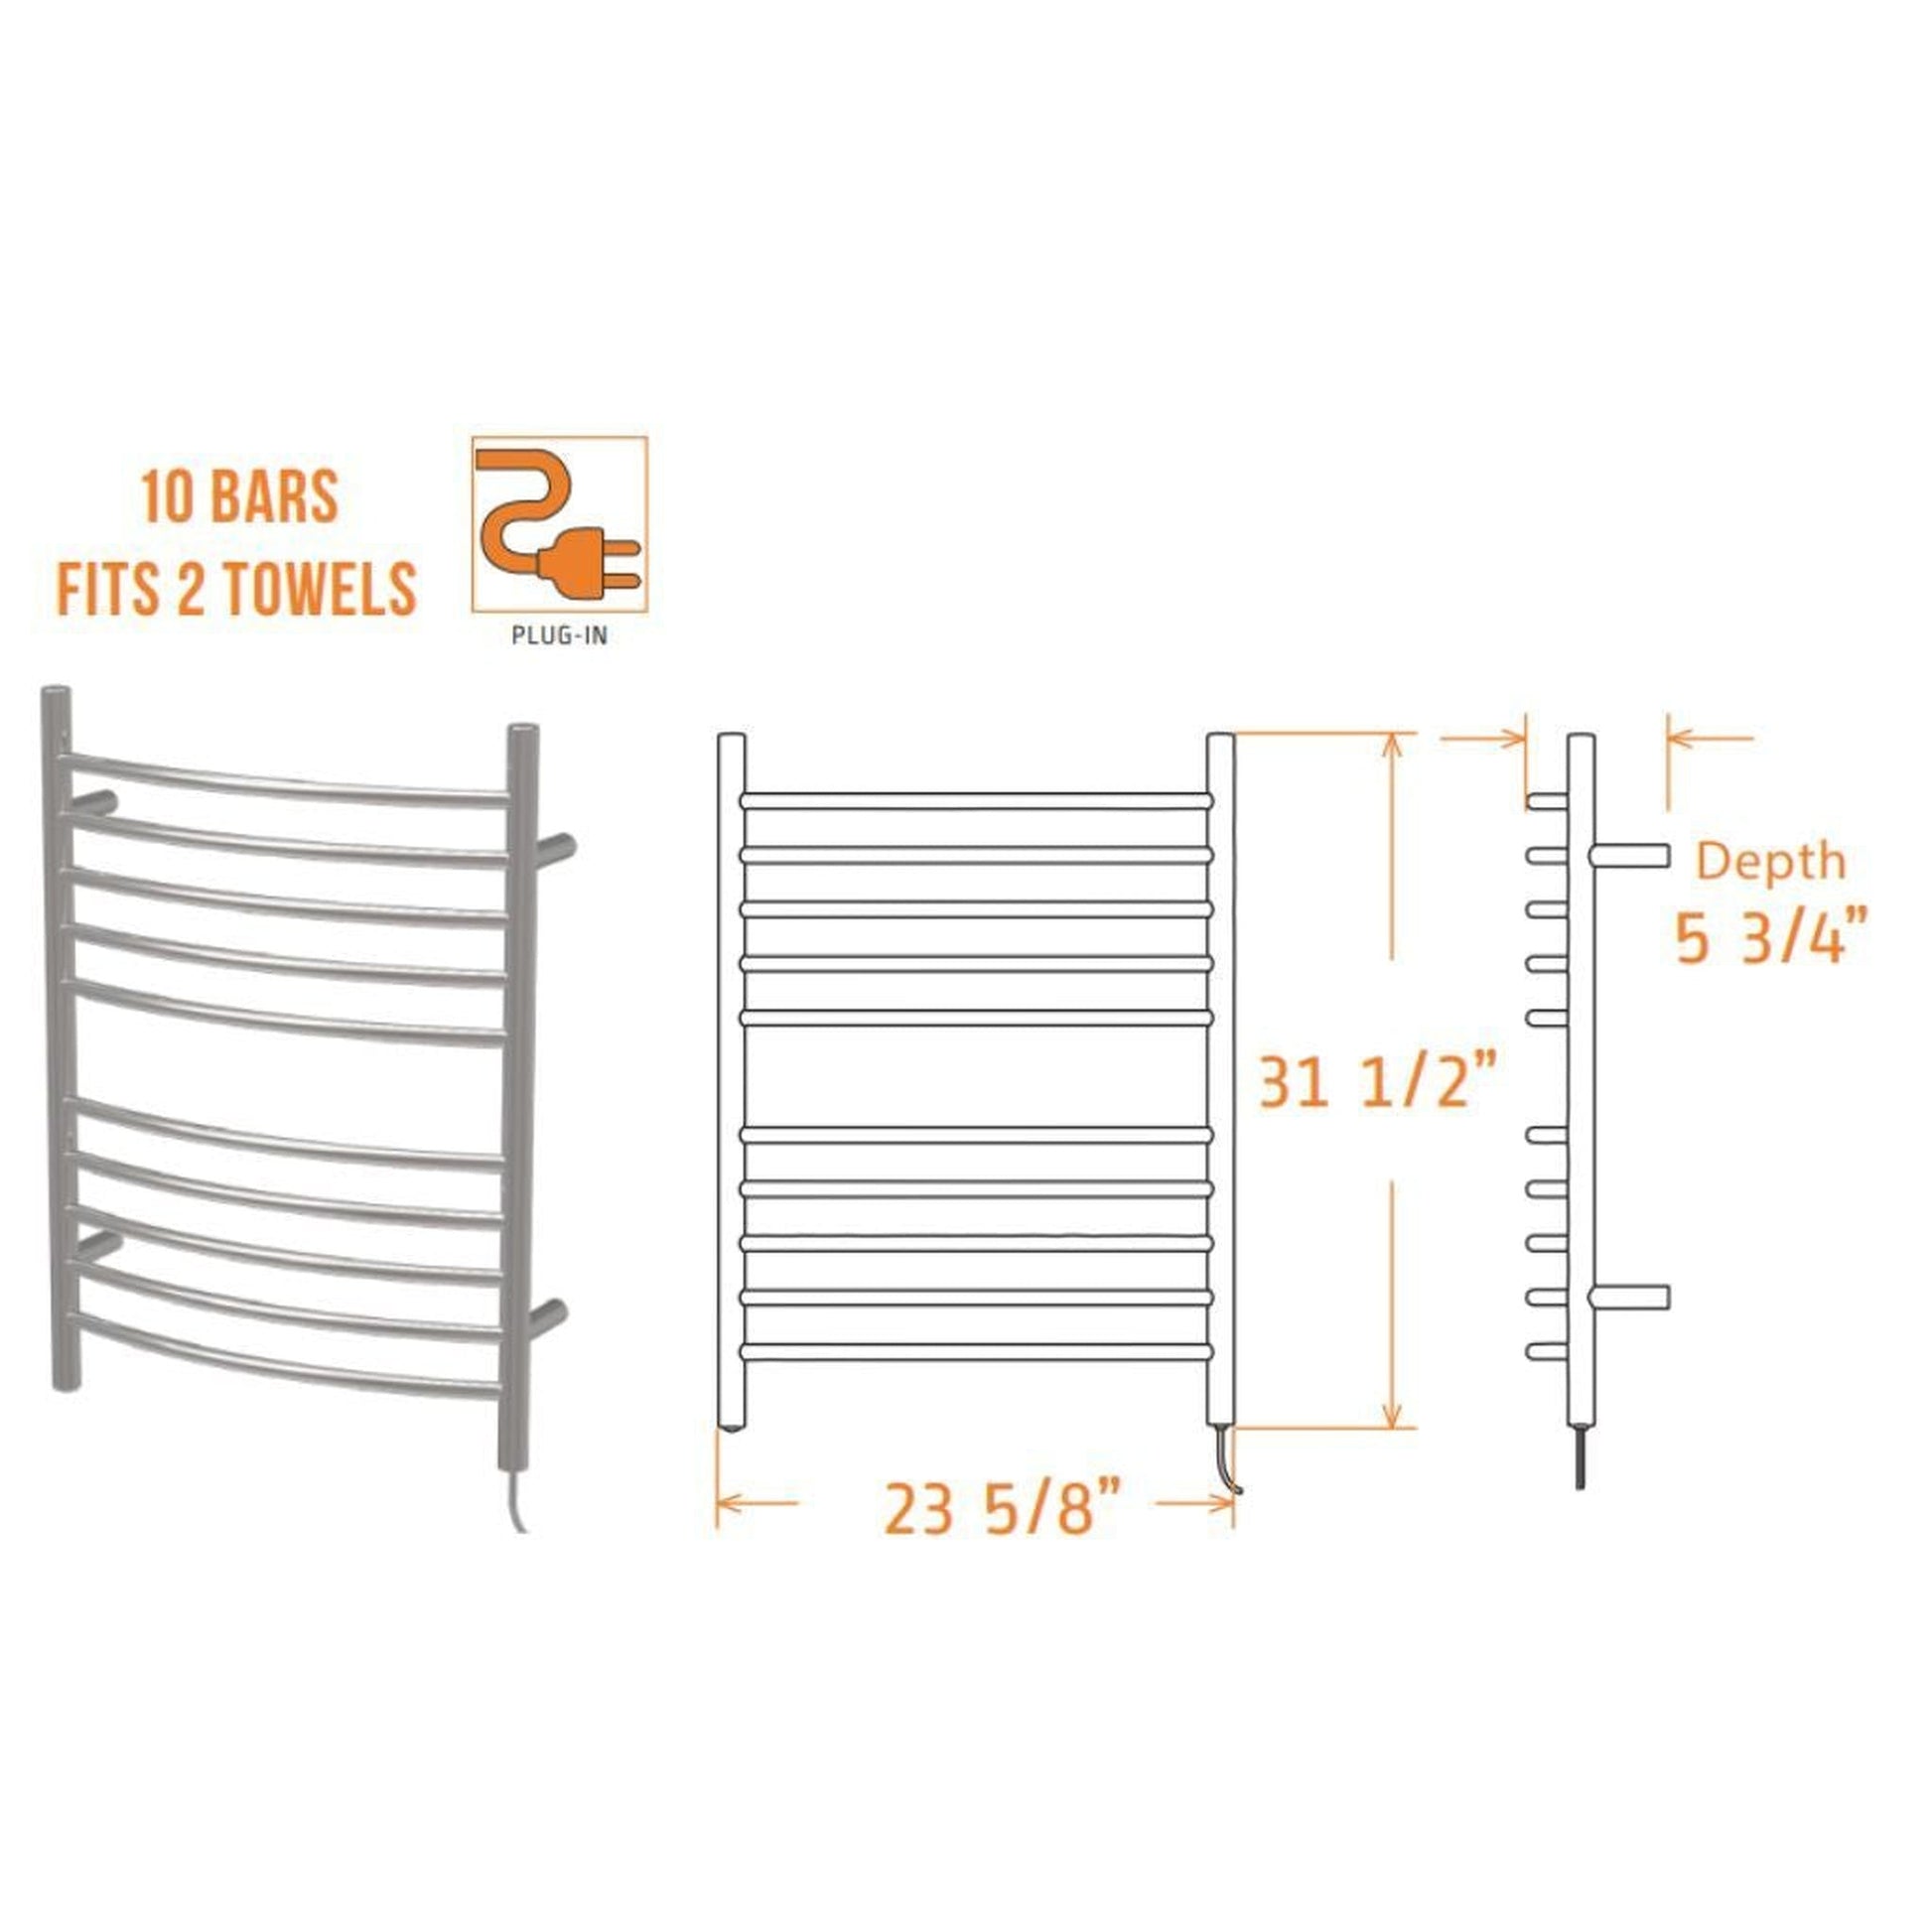 Amba Radiant Curved 10-Bar Brushed Stainless Steel Plug-In Towel Warmer With Integrated On/Off Switch